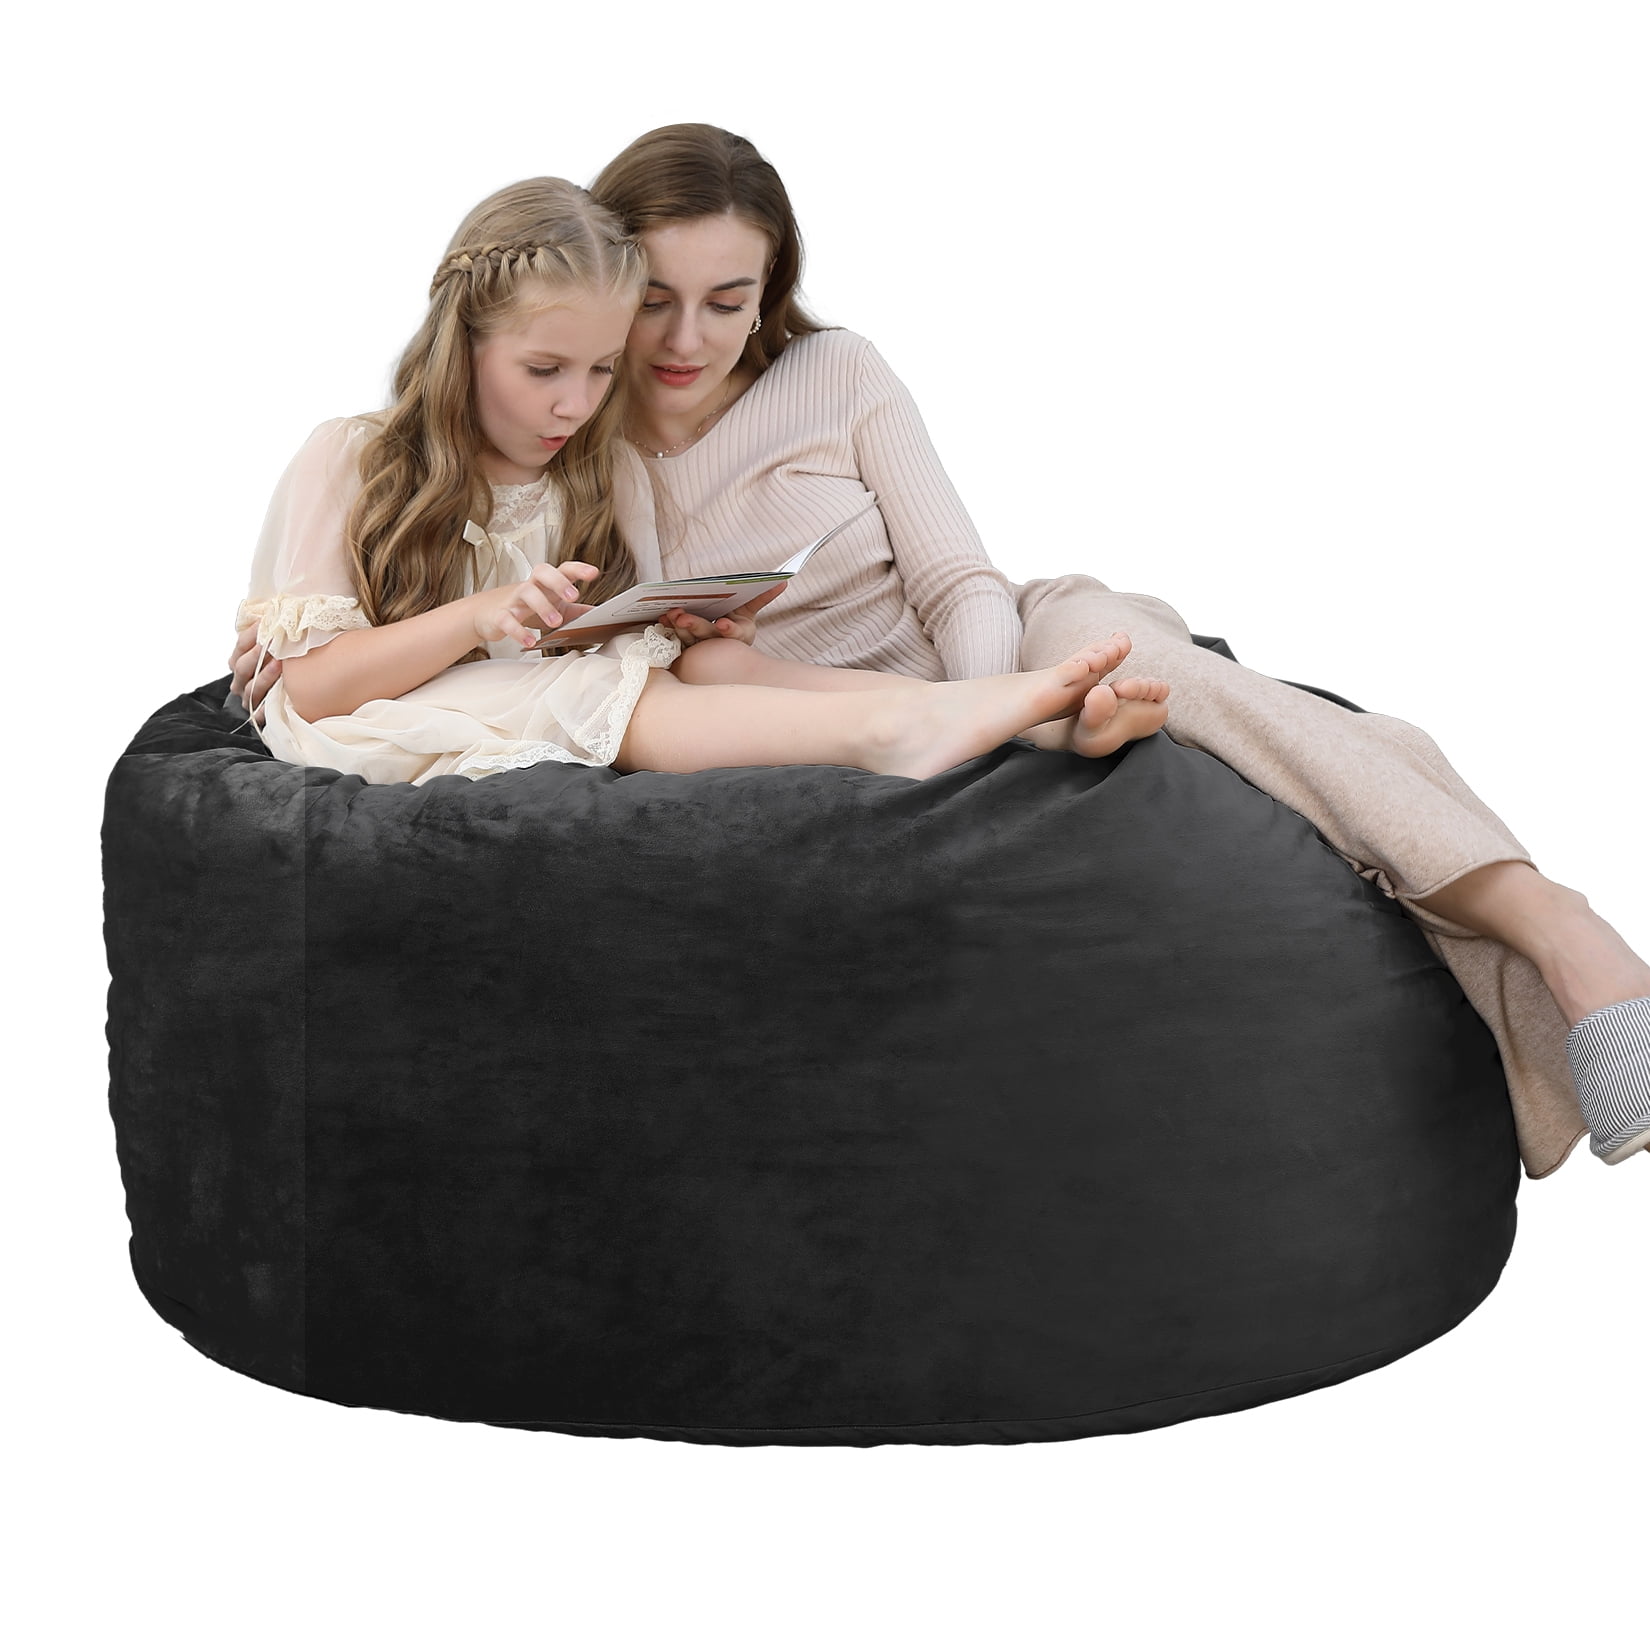 HABUTWAY Bean Bag Chair: Giant 4' Memory Foam Furniture Bean Bag Chairs for  Adults with Microfiber Cover - 4Ft, Black